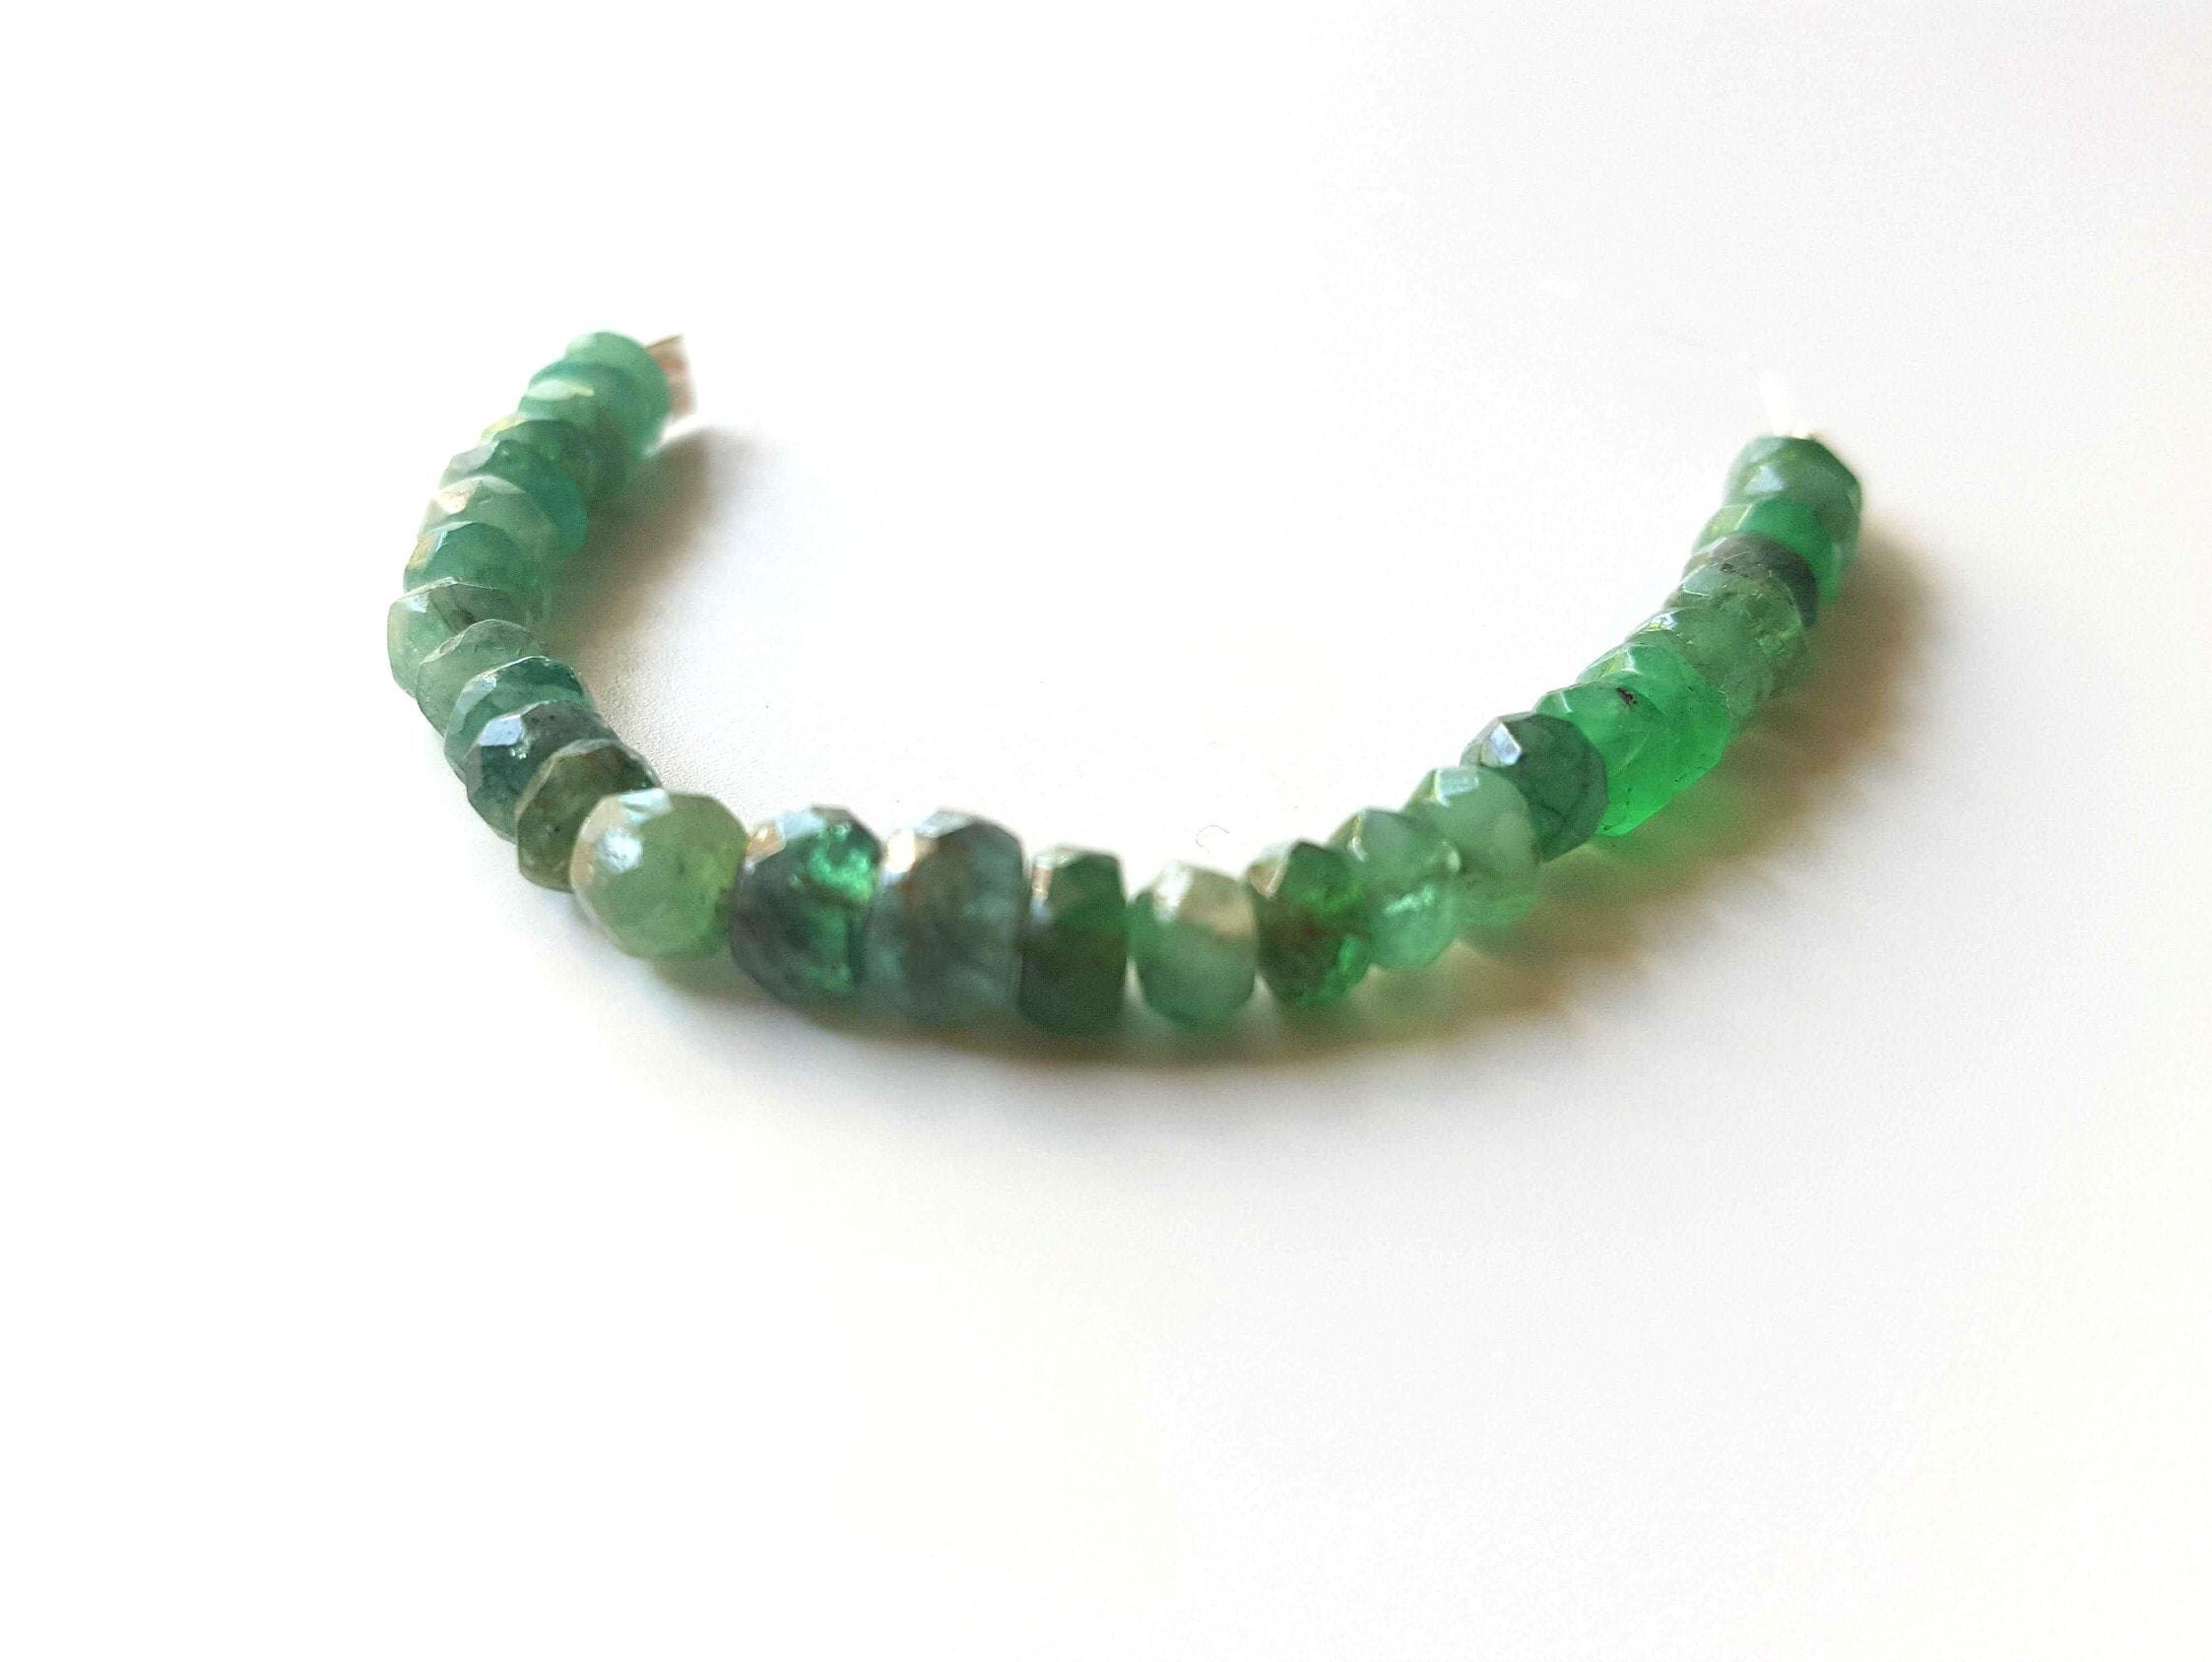 Natural Emerald 4mm*5mm Beads Free Shipping 20 loose FACETED Roundel 